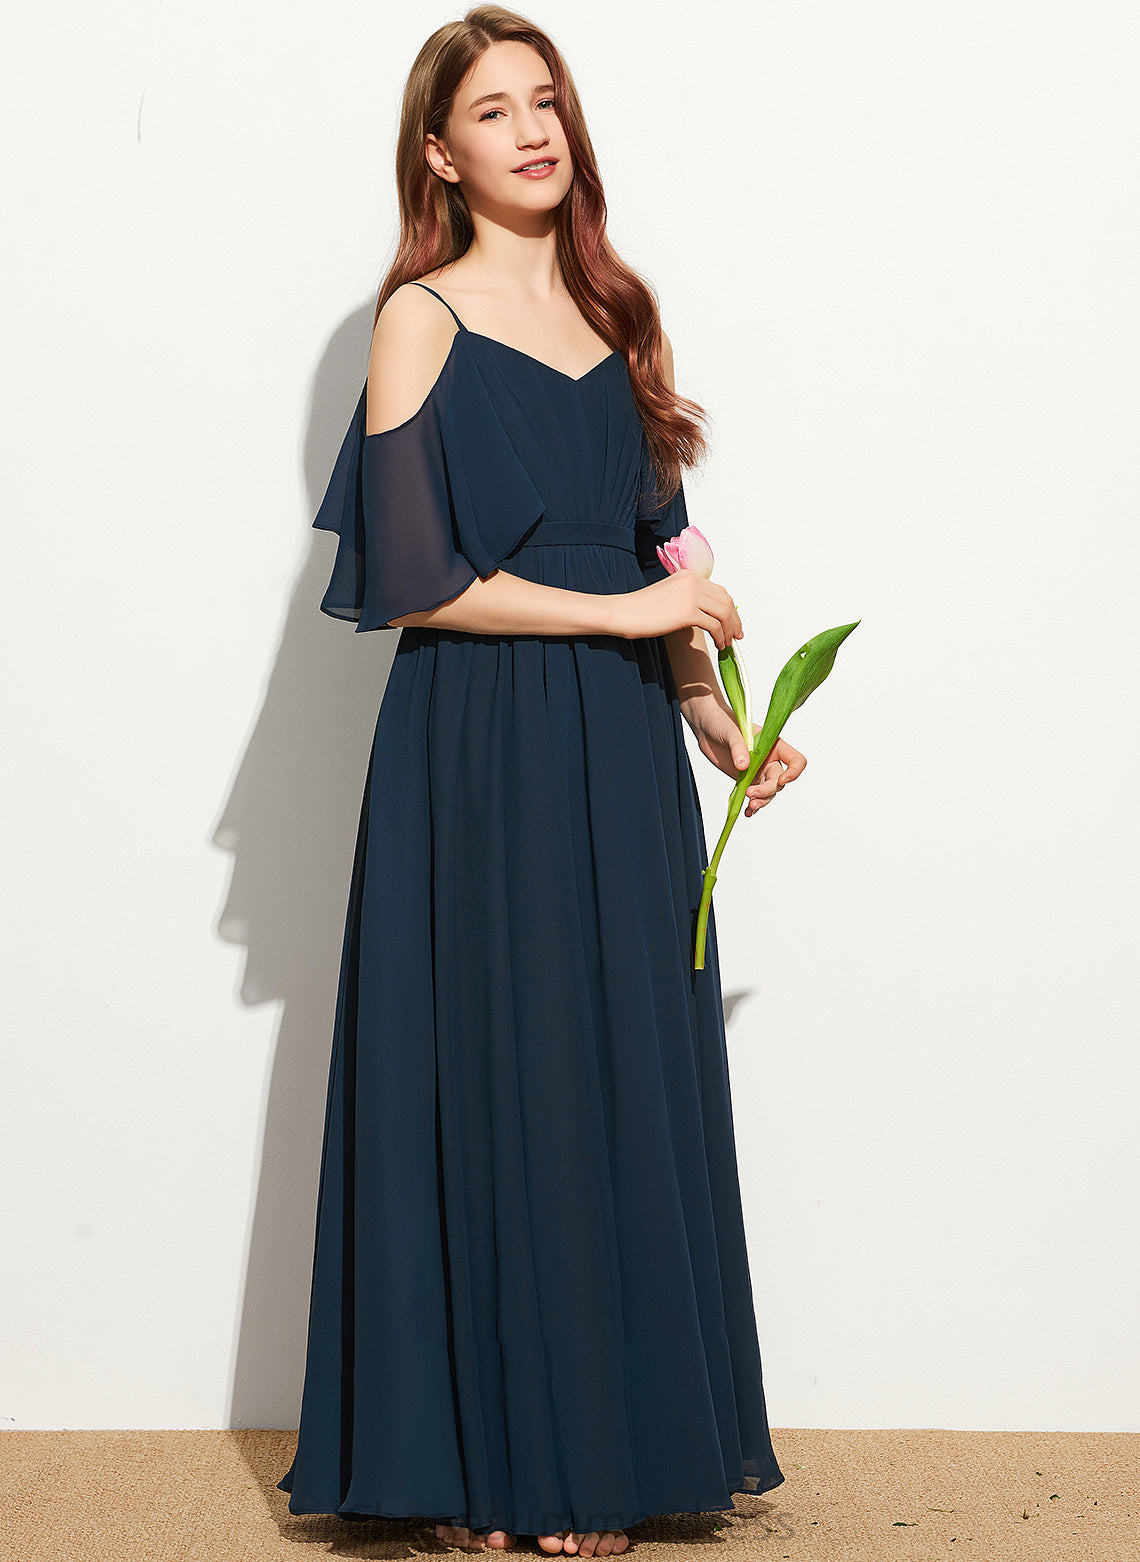 With Natalie A-Line Junior Bridesmaid Dresses Chiffon Ruffle Floor-Length Off-the-Shoulder